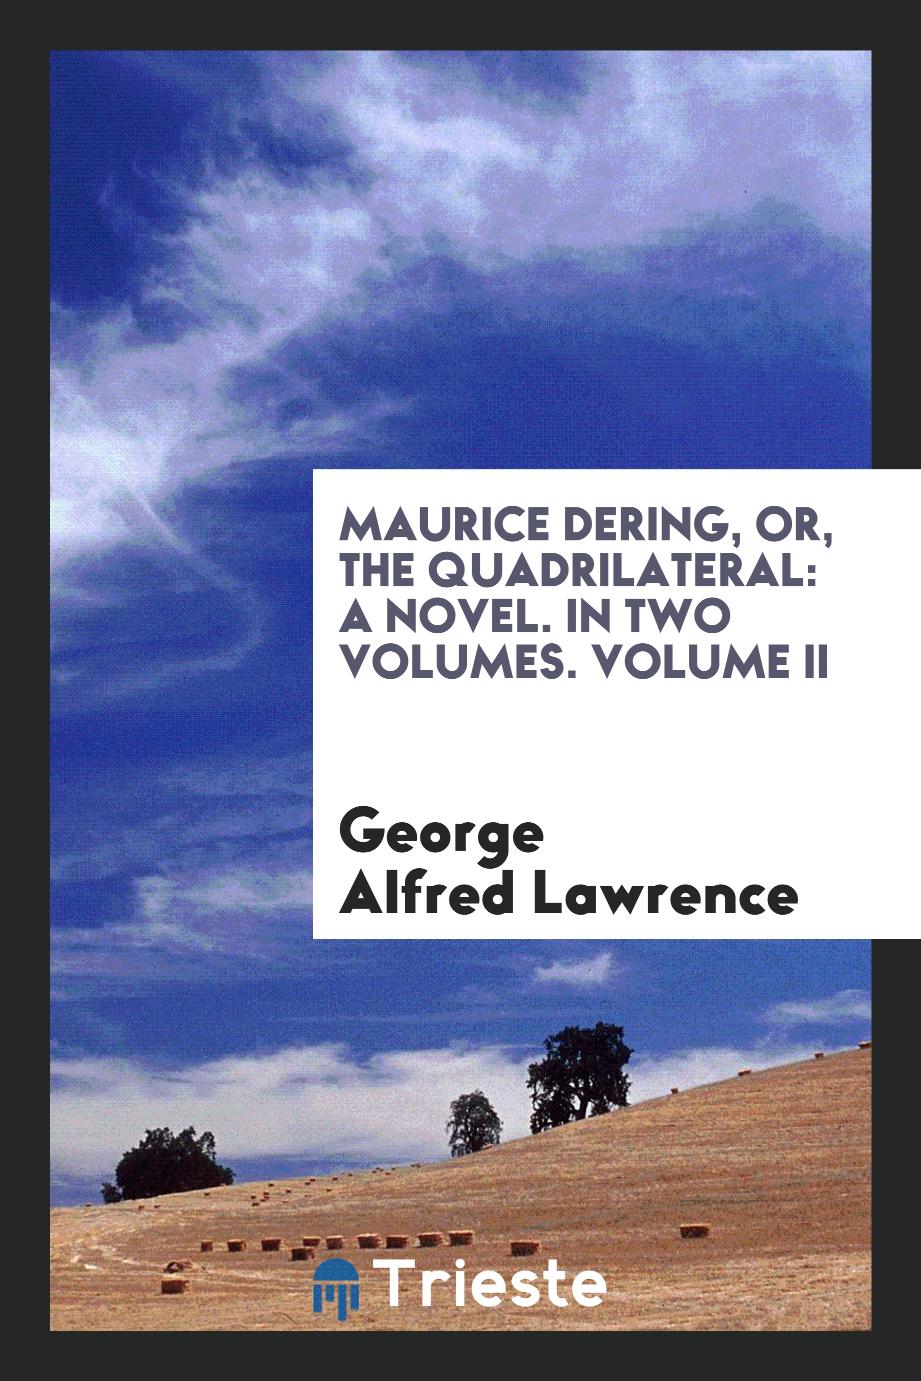 Maurice Dering, or, The quadrilateral: a novel. In two volumes. Volume II